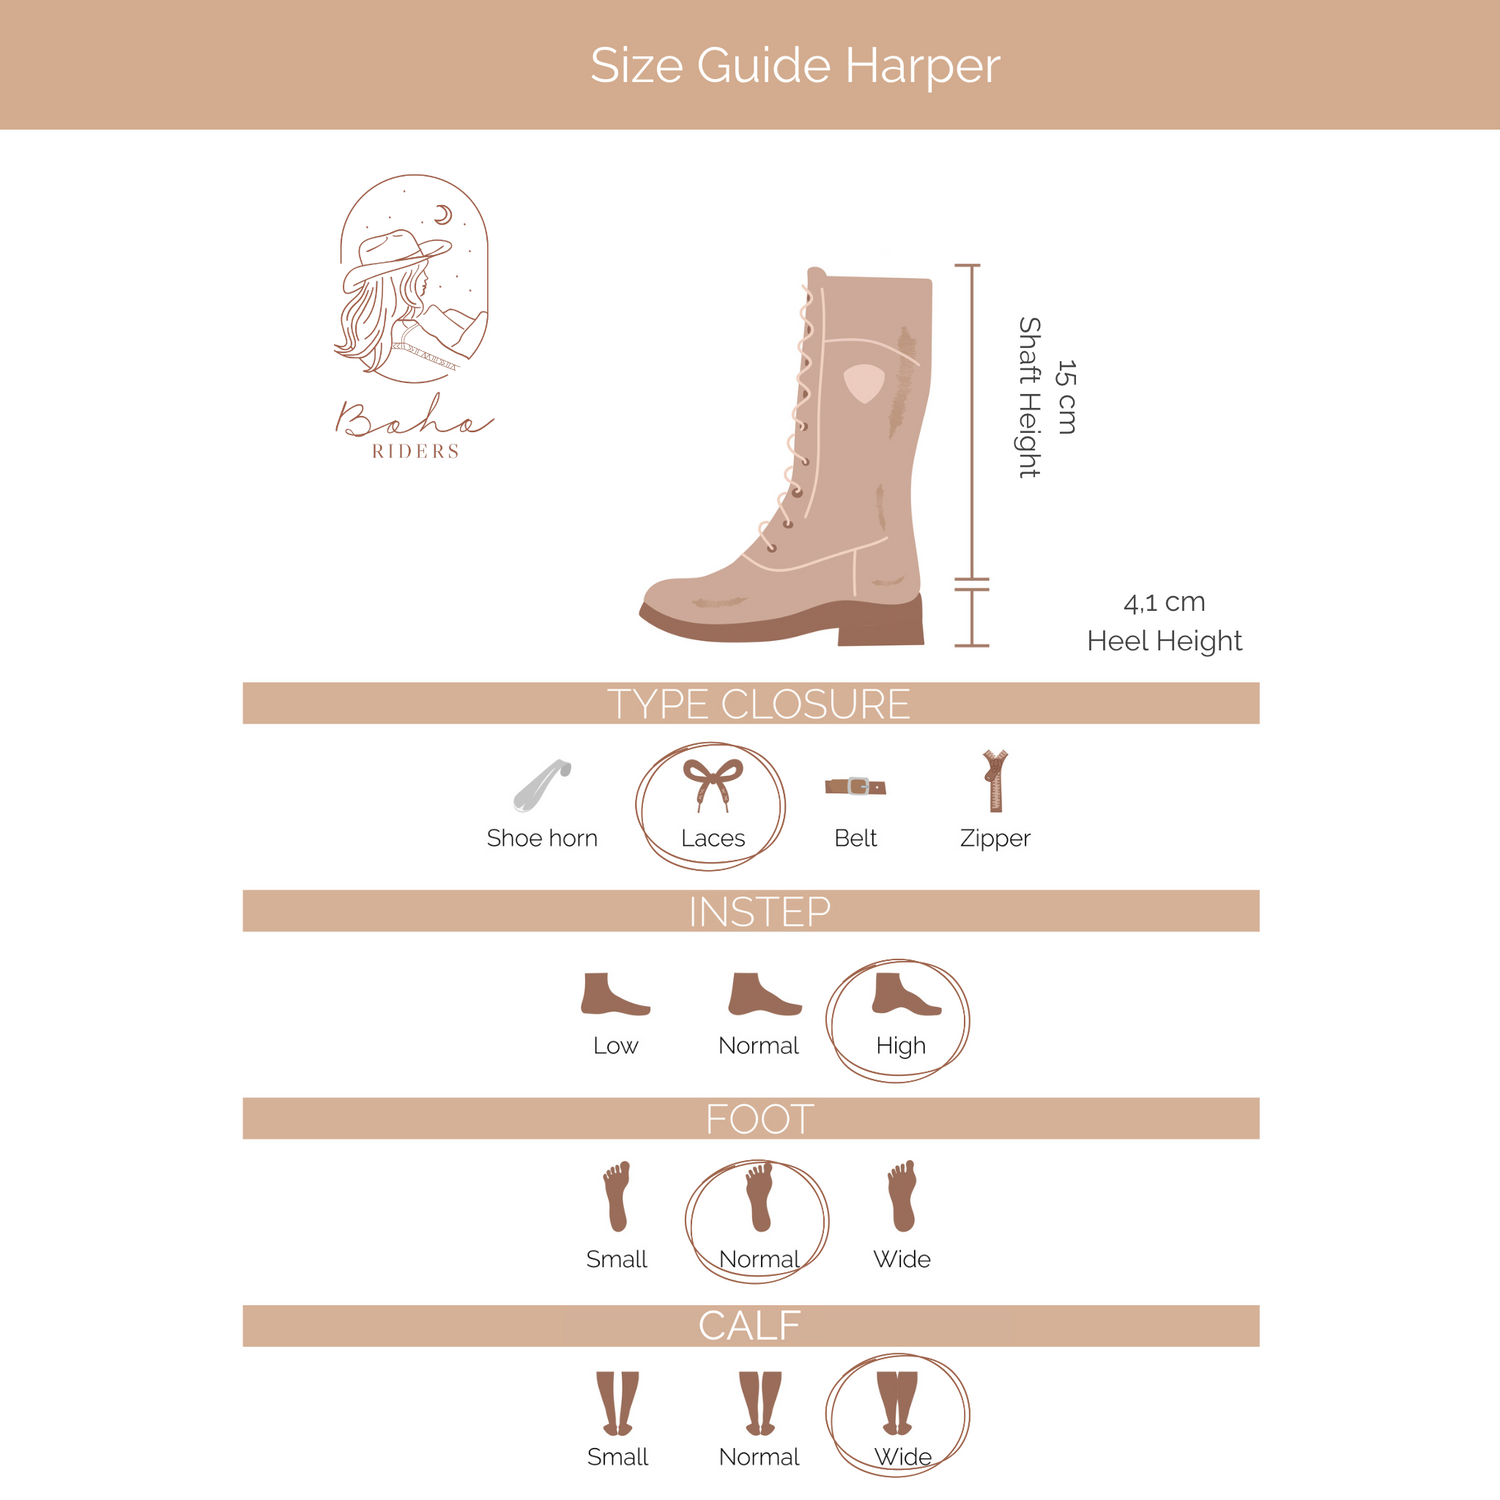 What you want to know about the fit ofAriat Harper H2O Waterproof Boots - Riding Boots - Outdoor Shoe - Dark Earth